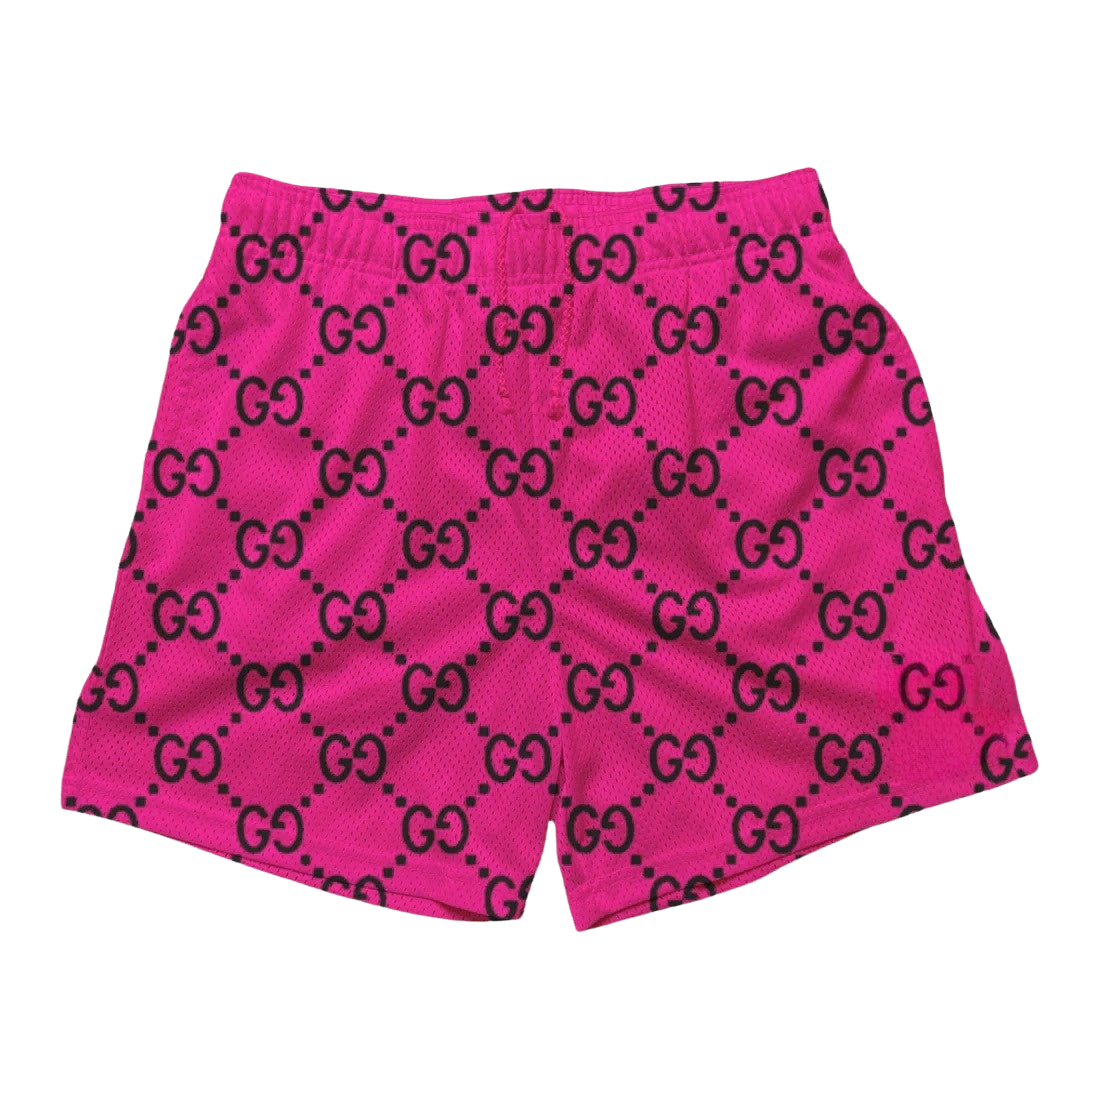 a pink shorts with the word gg on it